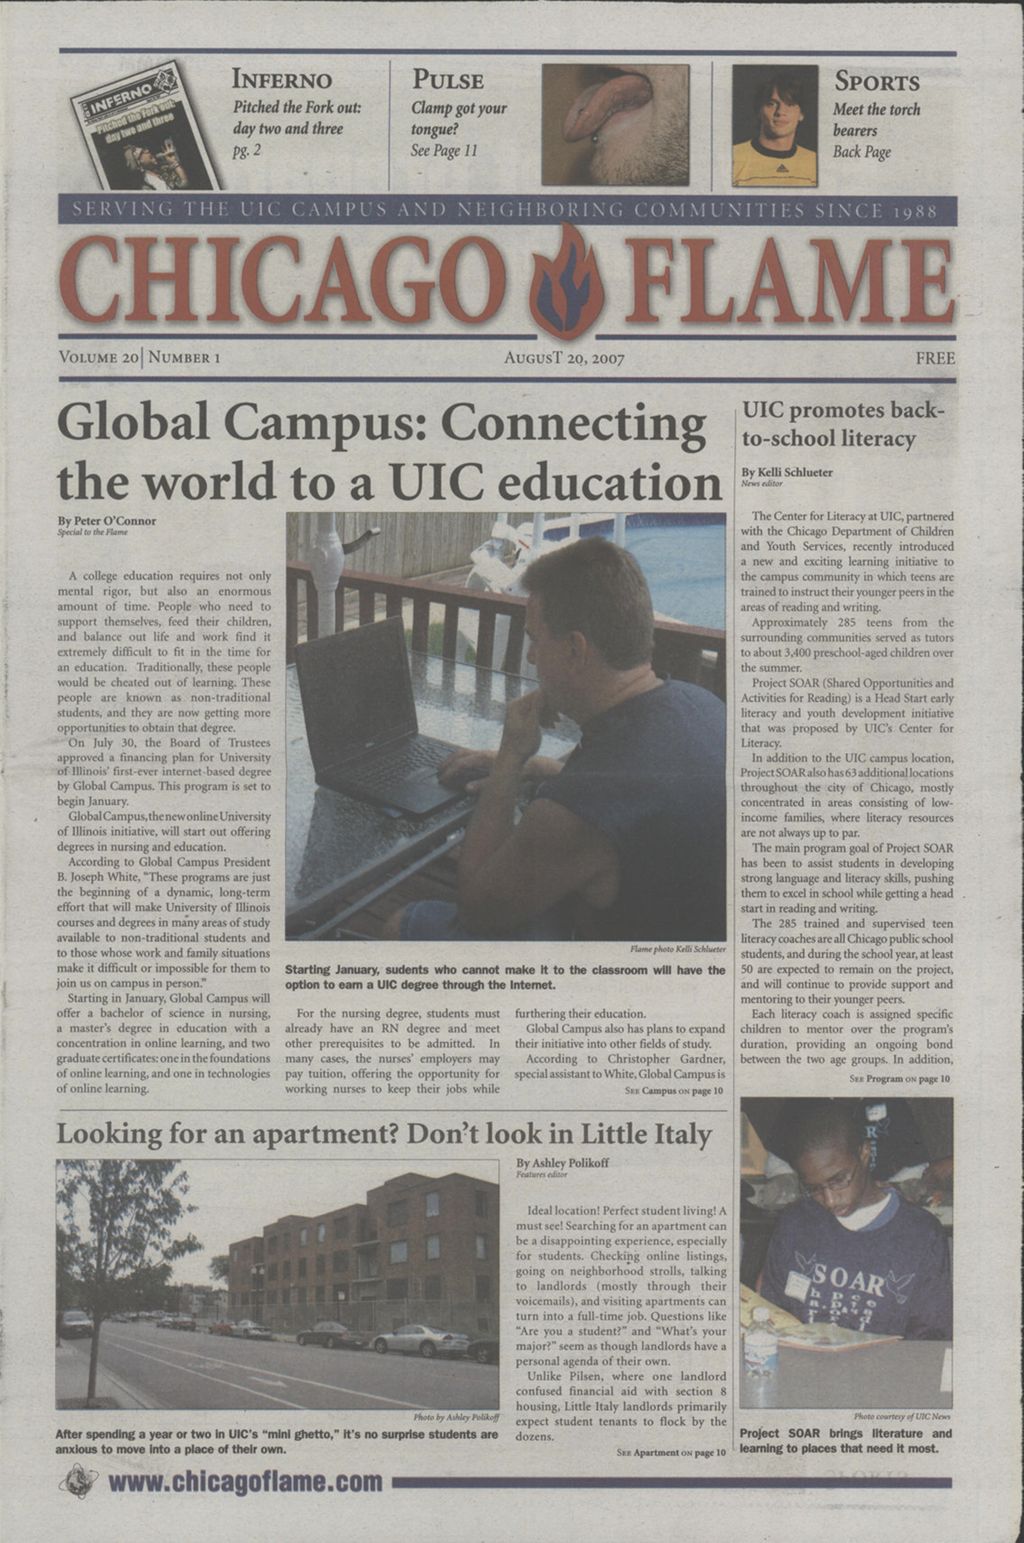 Chicago Flame (August 20, 2007)